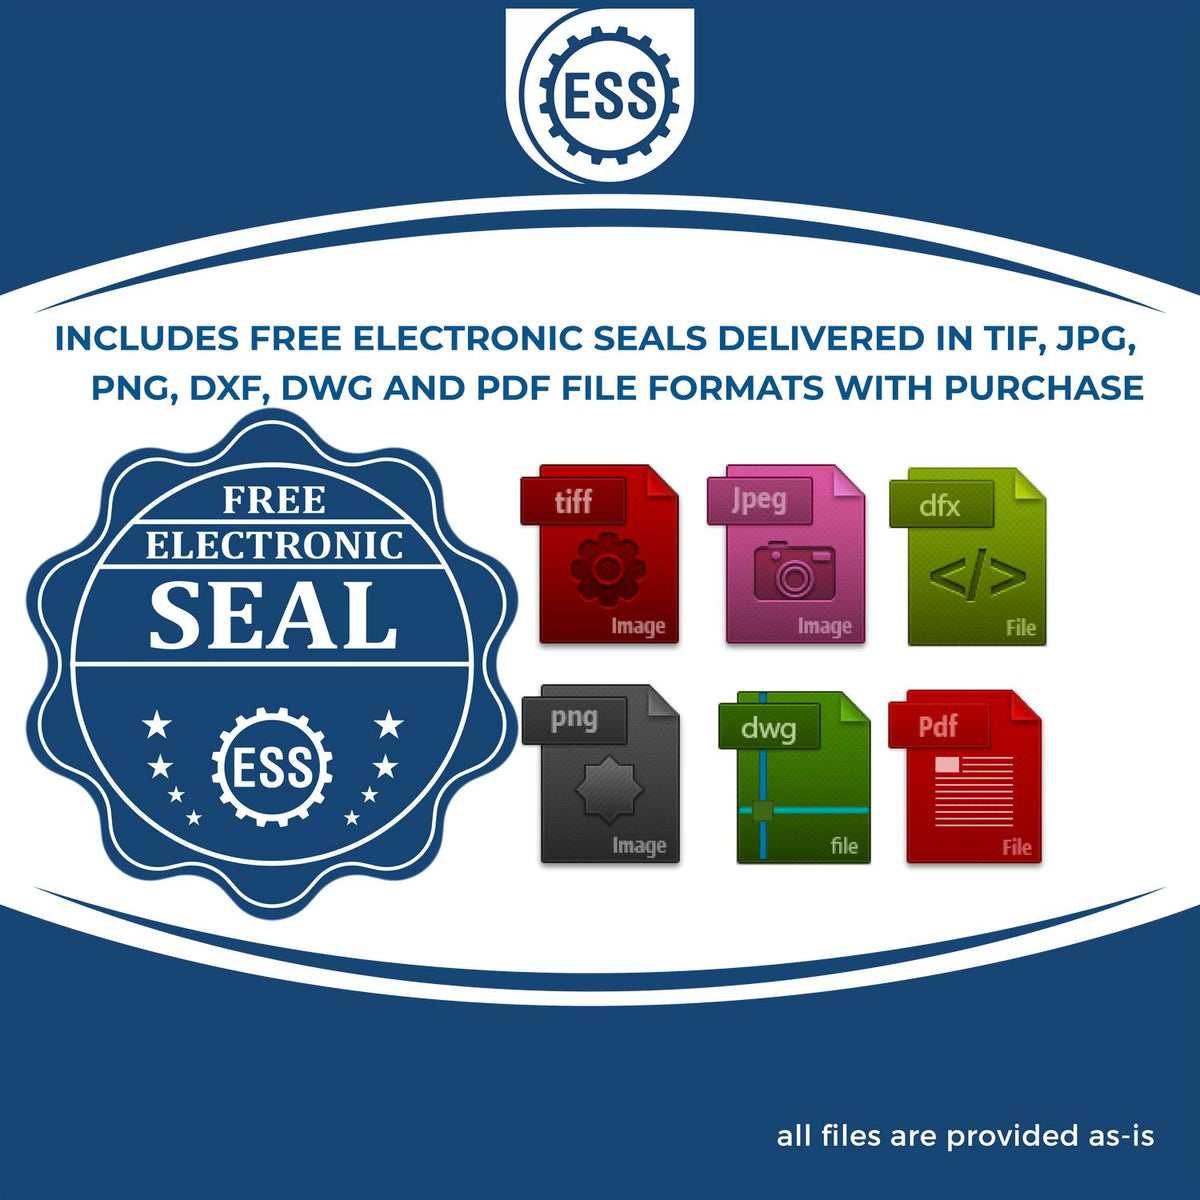 An infographic for the free electronic seal for the Gift Nevada Landscape Architect Seal illustrating the different file type icons such as DXF, DWG, TIF, JPG and PNG.